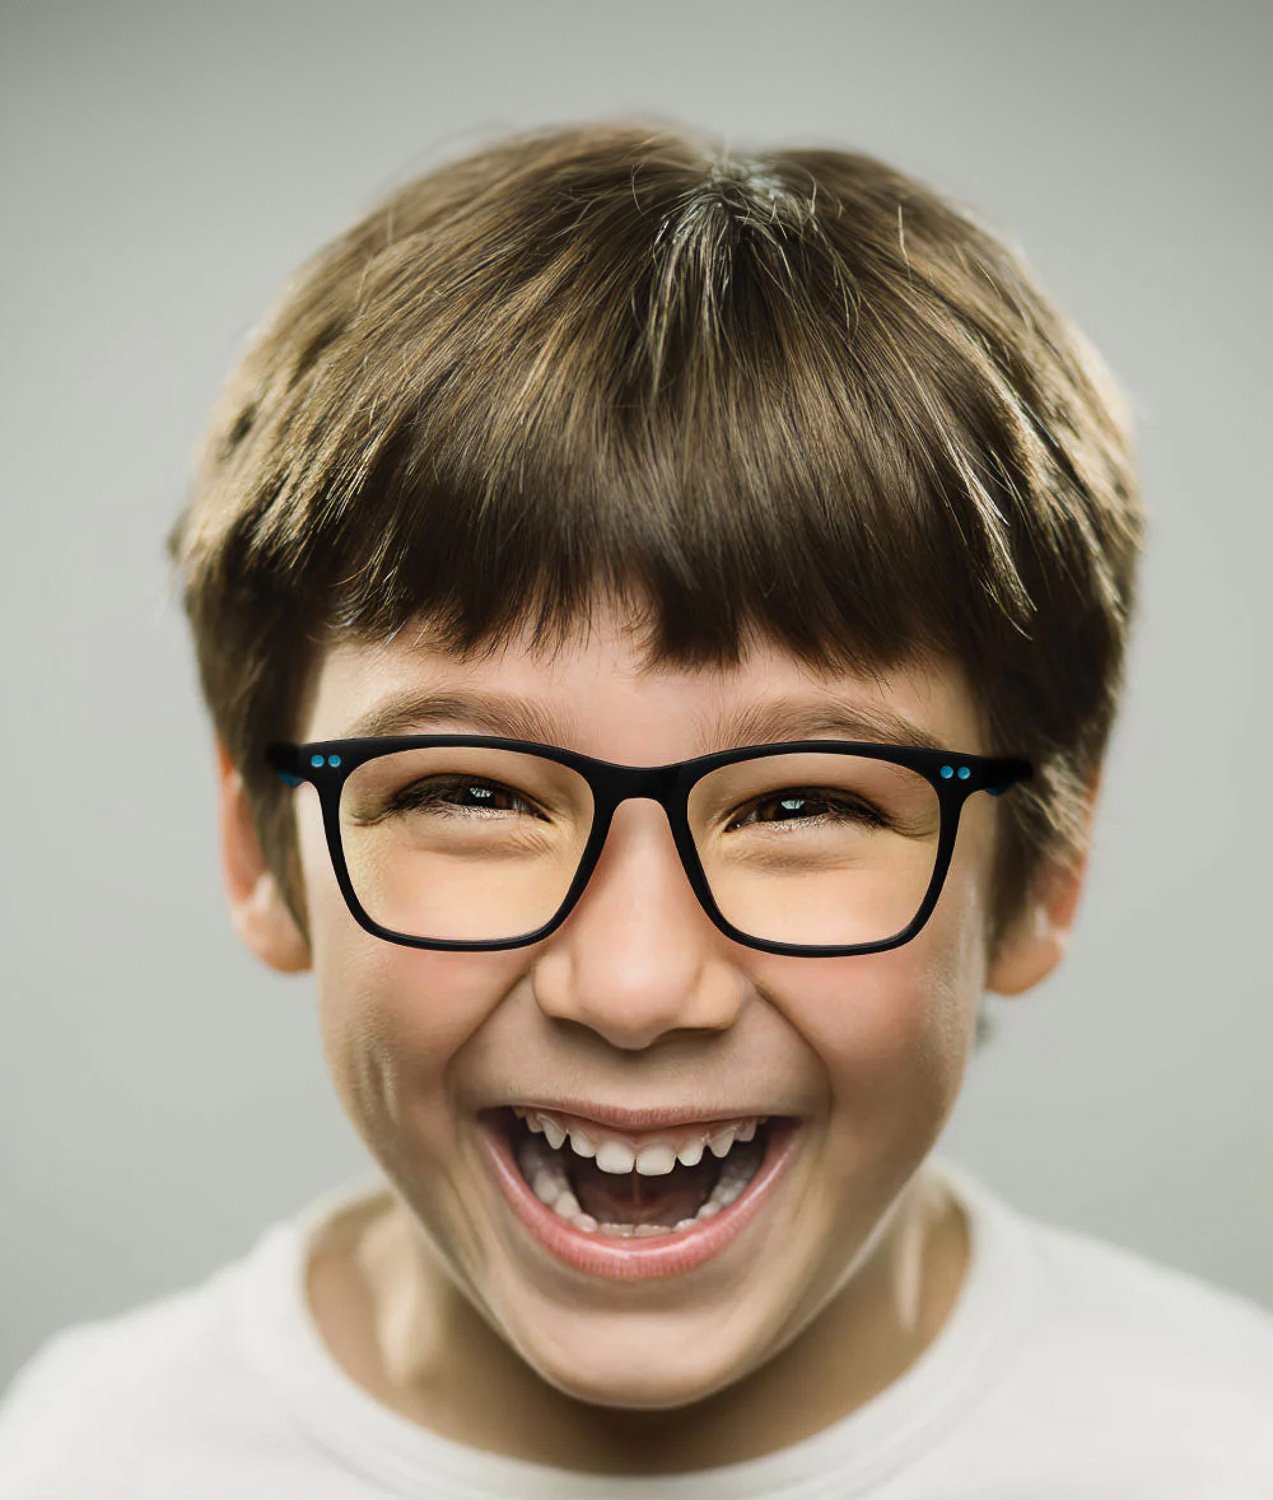 A close up of a boy wearing glasses smiling at camera